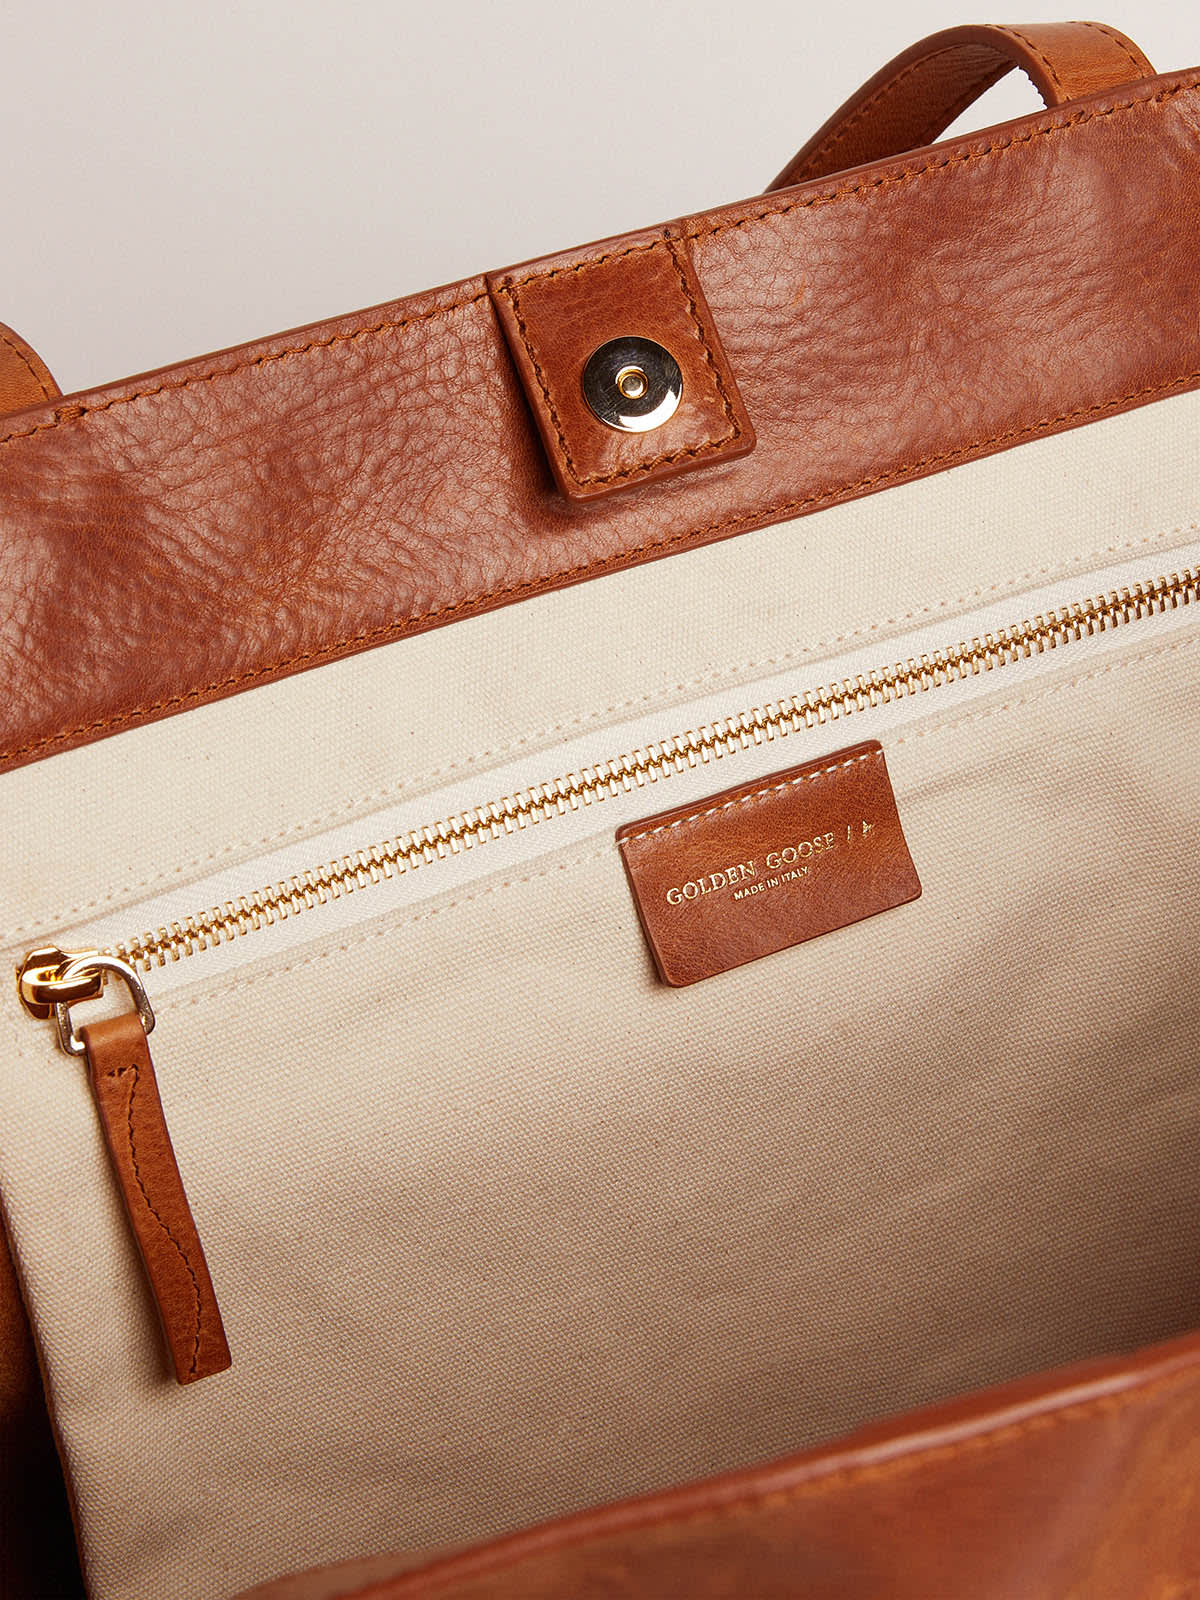 Golden Goose - Tan-colored Pasadena Bag with gold logo on the front in 